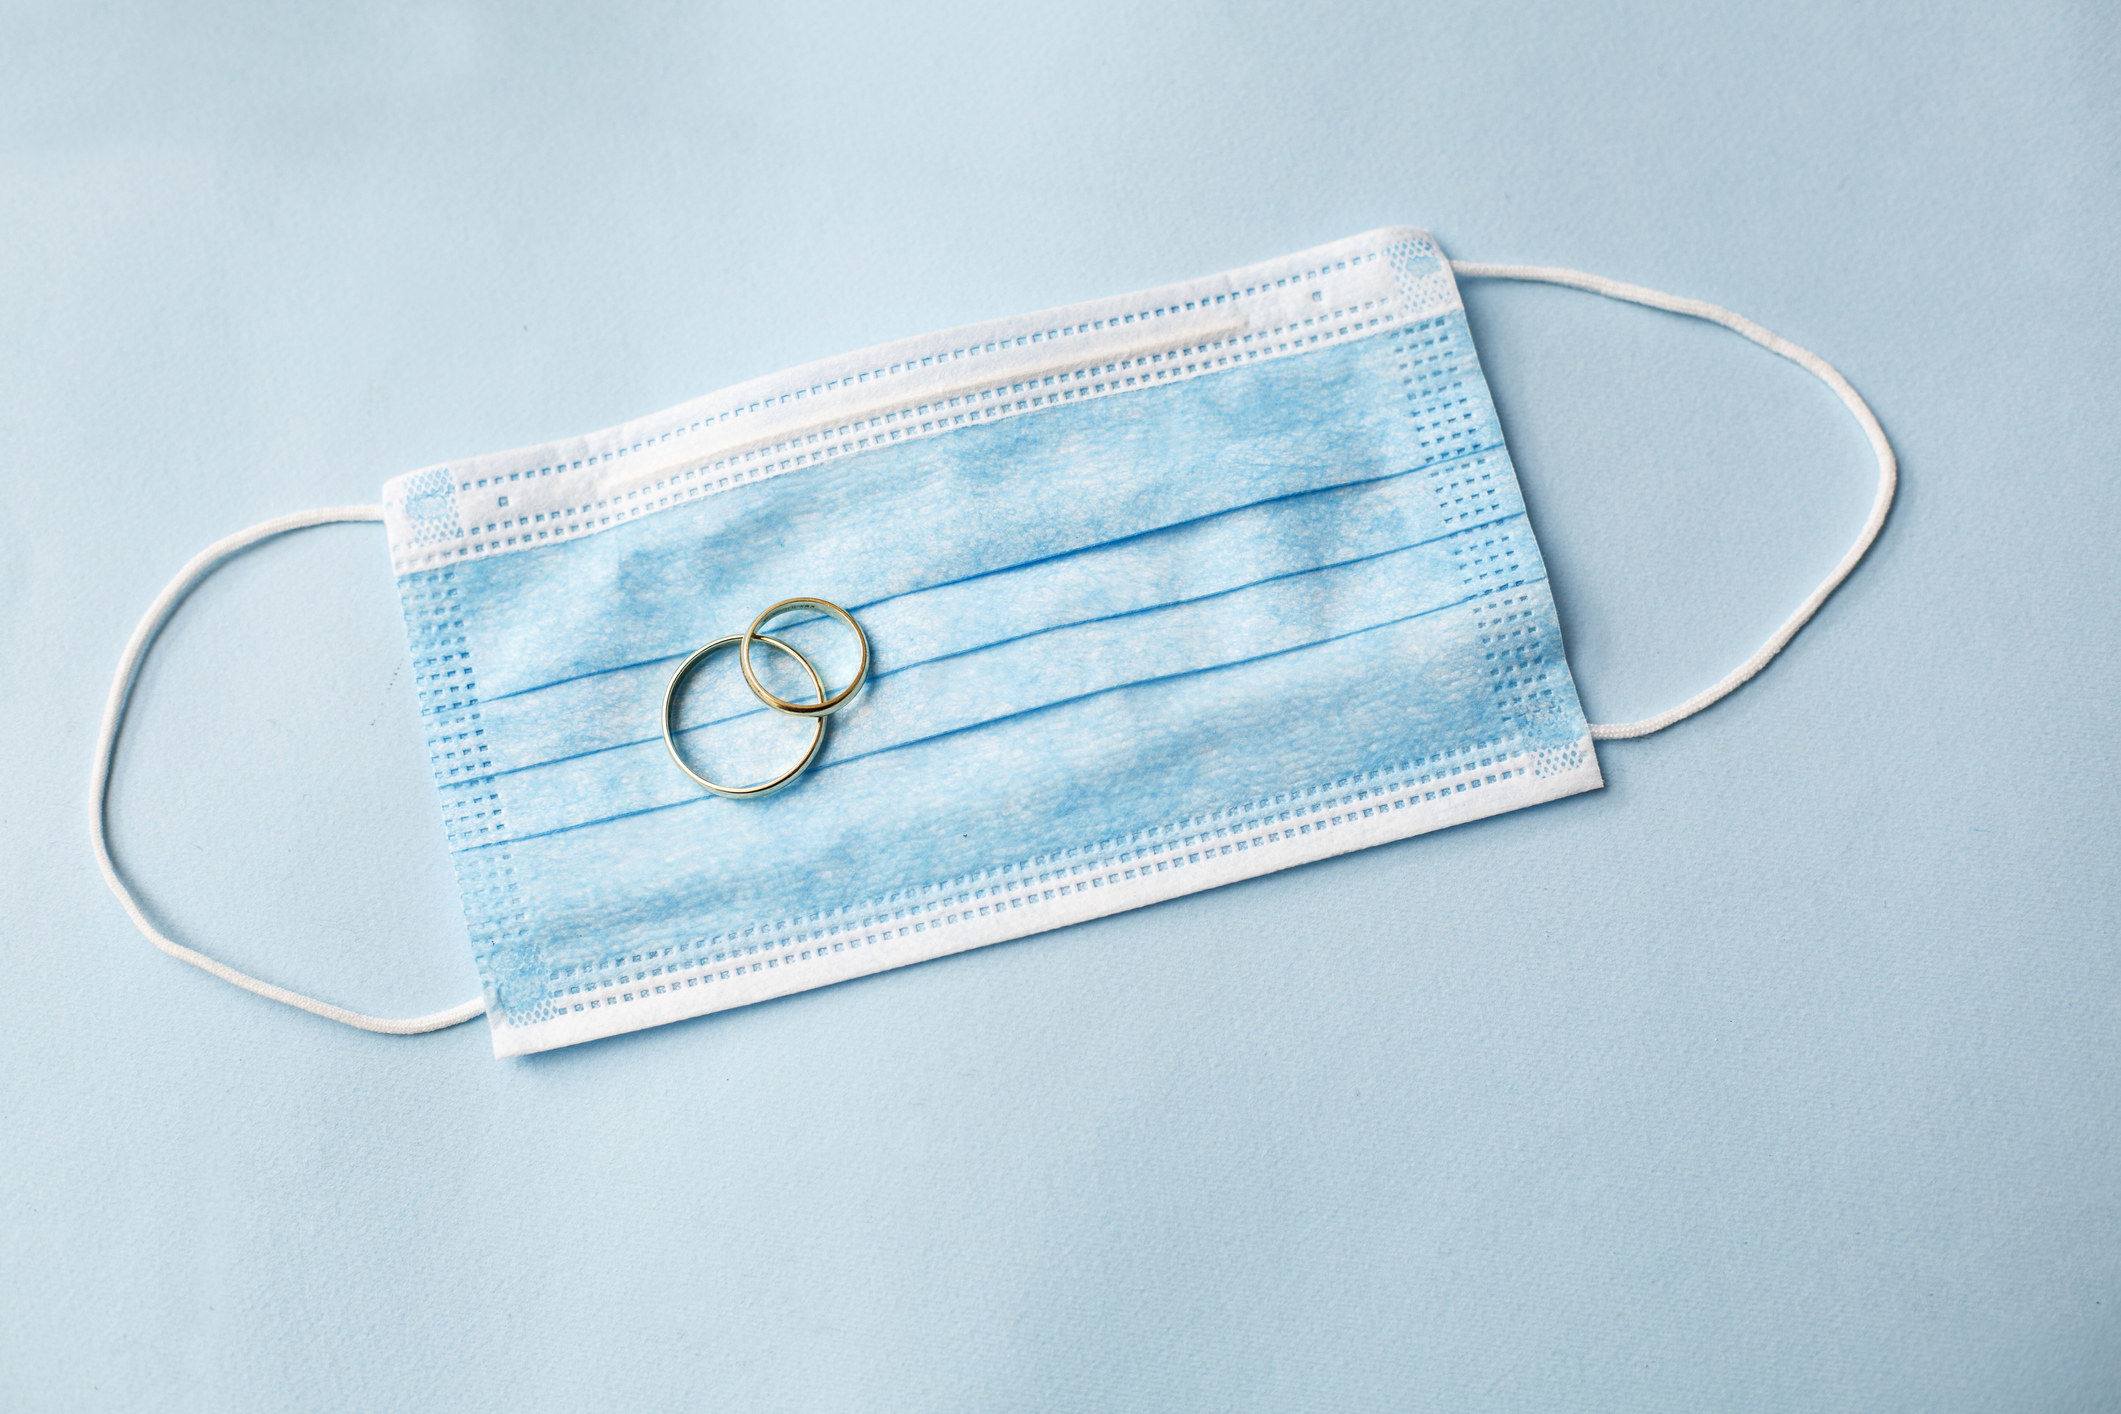 Two wedding rings on top of a surgical mask